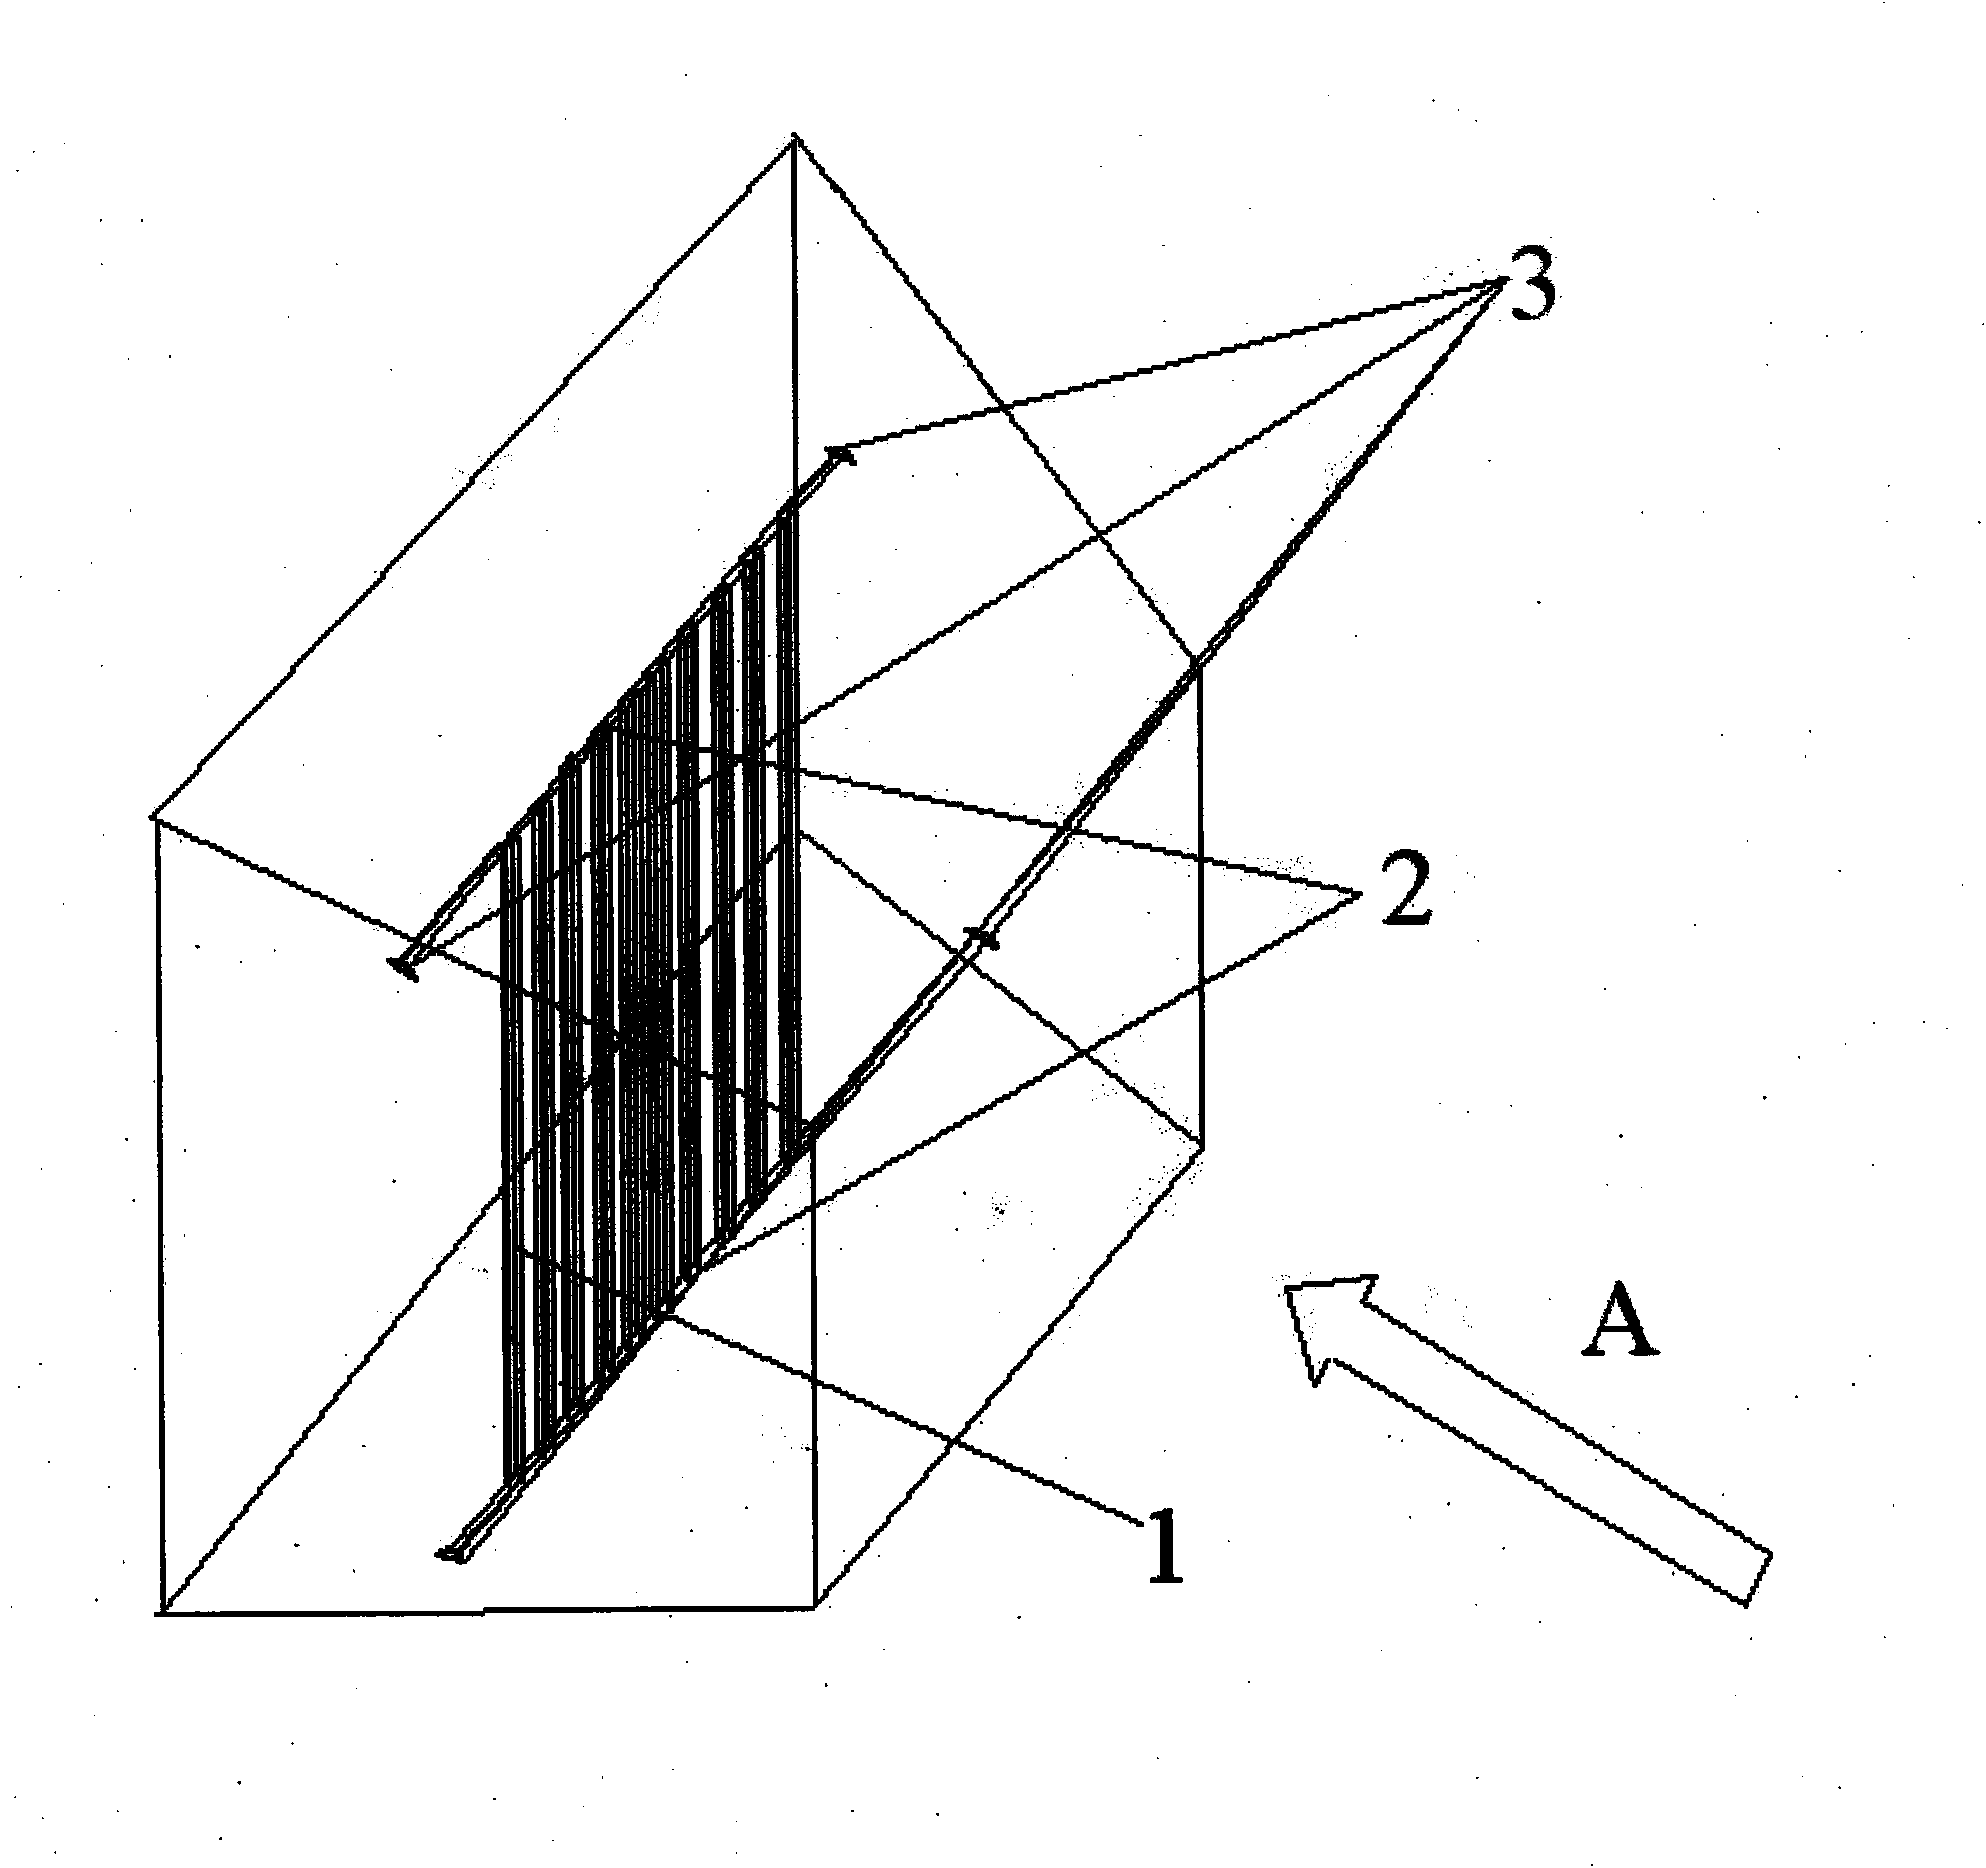 Lateral inlet air flow equalization device